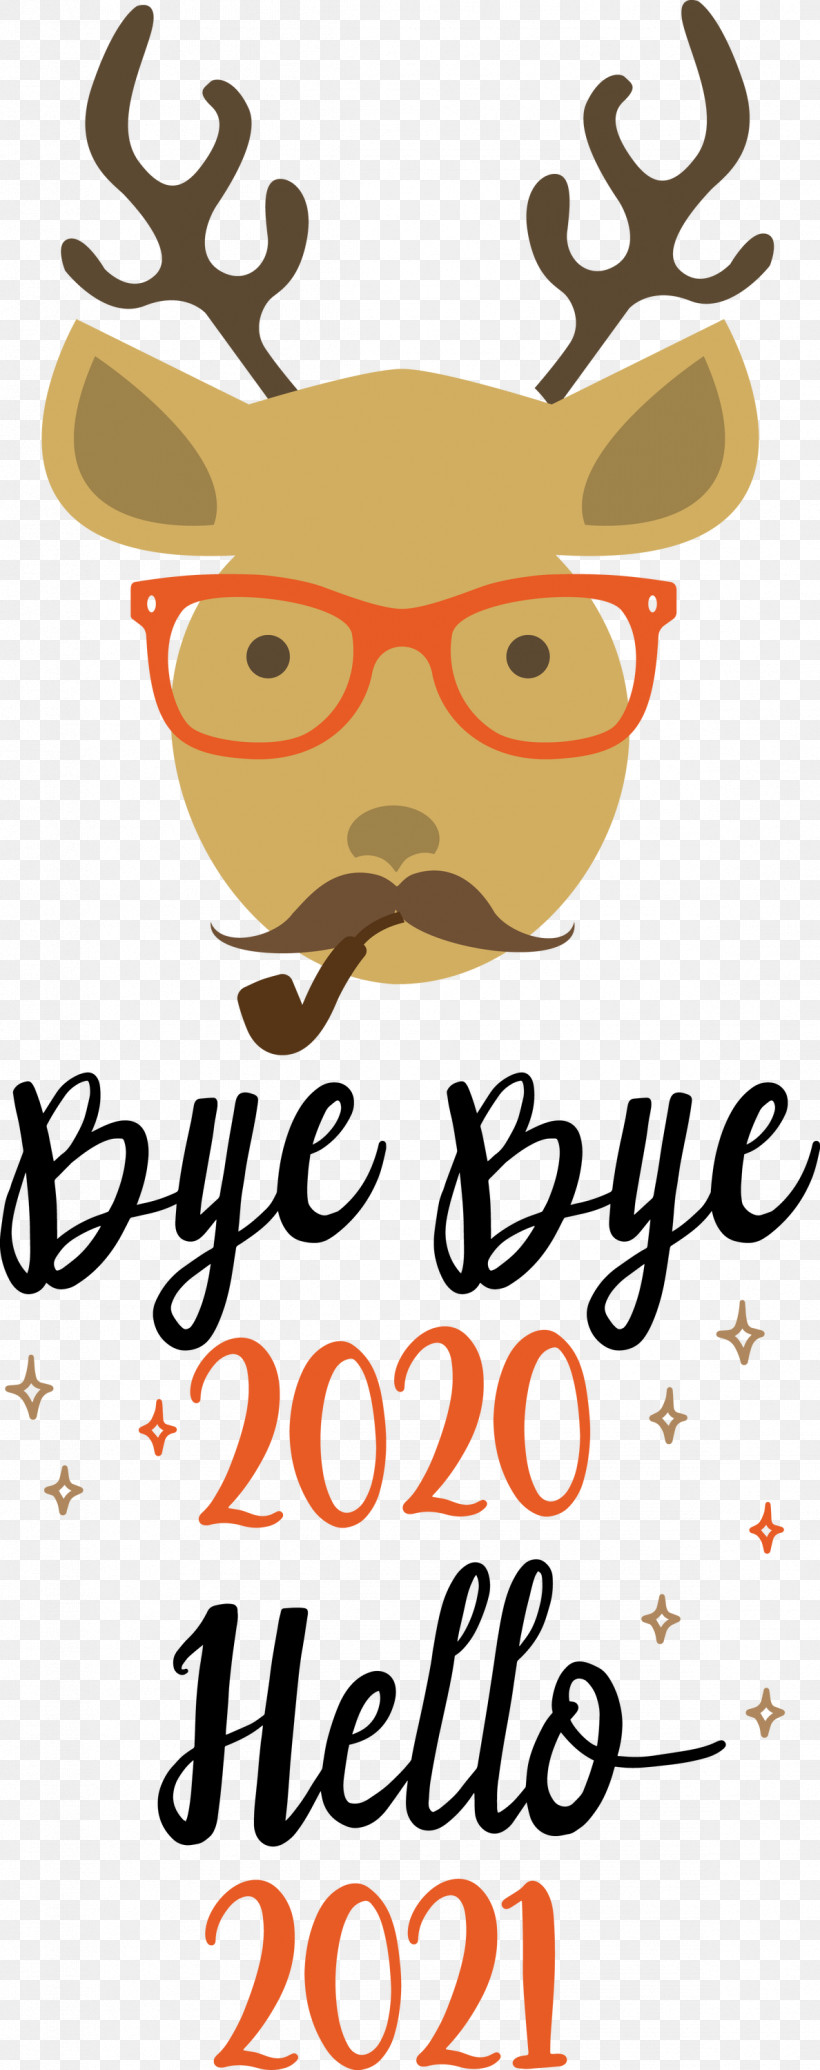 Hello 2021 Year Bye Bye 2020 Year, PNG, 1188x2999px, Hello 2021 Year, Abstract Art, Bye Bye 2020 Year, Christmas Day, Drawing Download Free